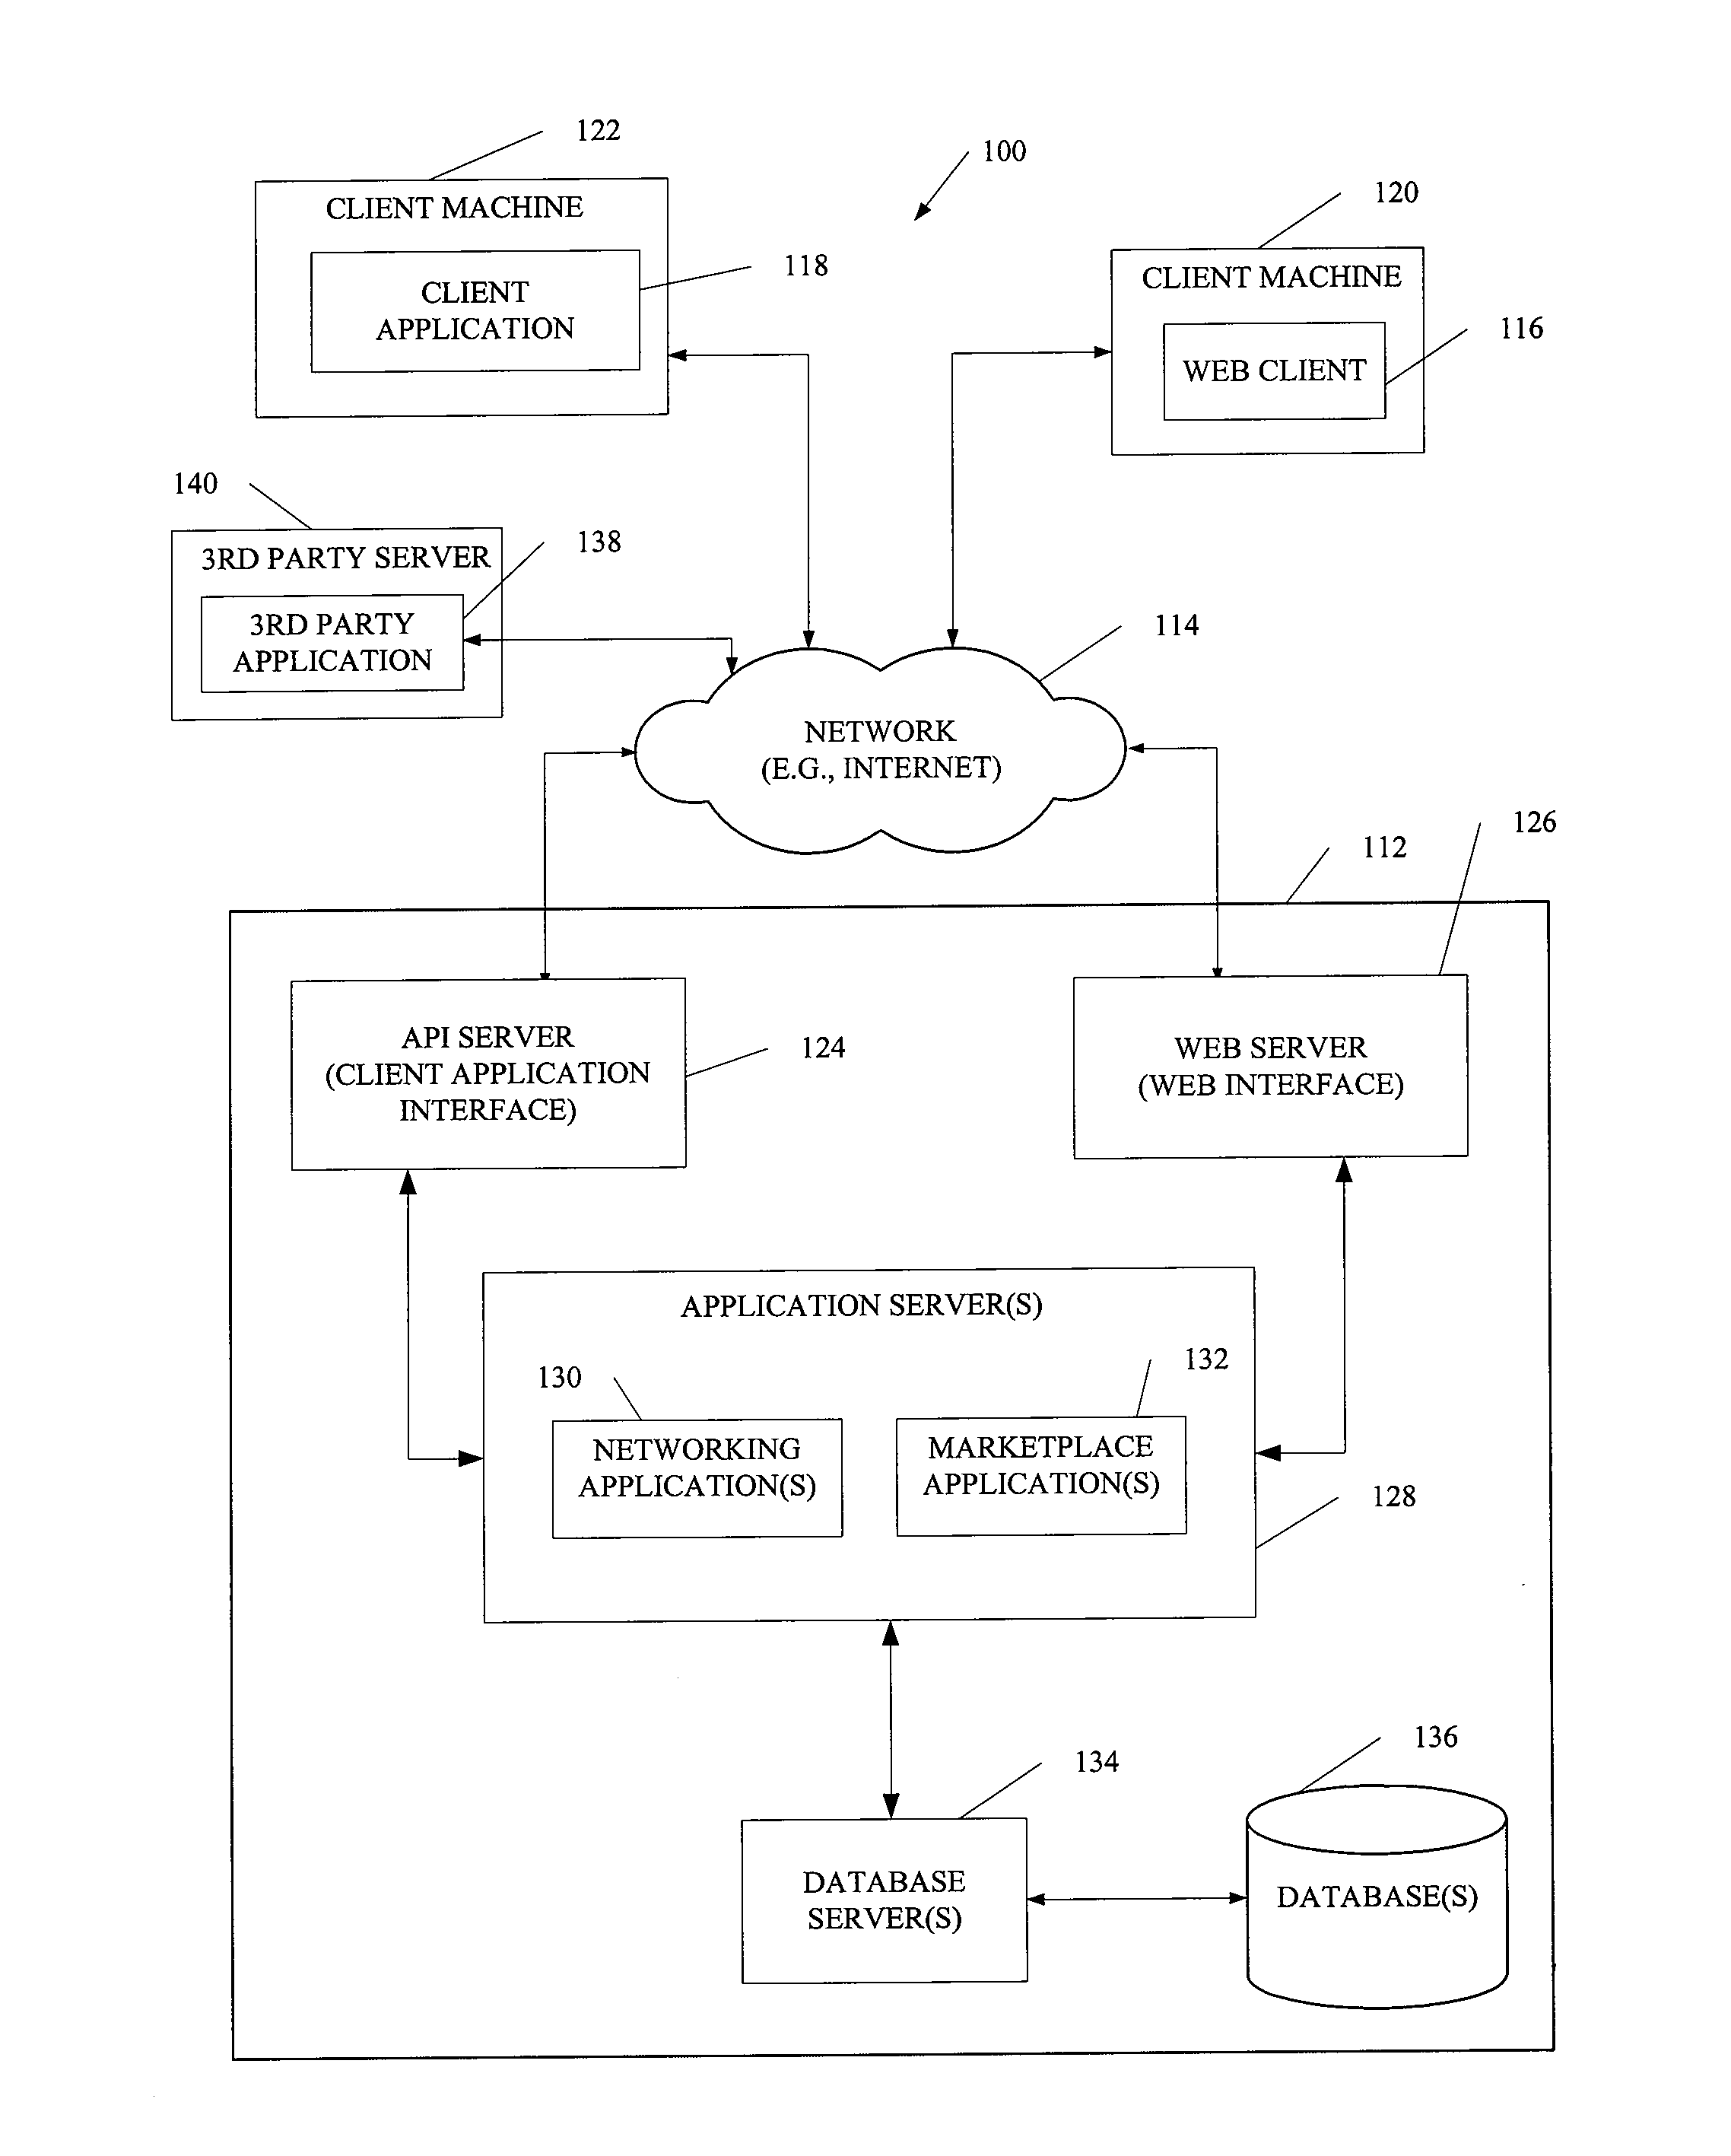 System and method enabling searching for items, listings, or products based on listing activity